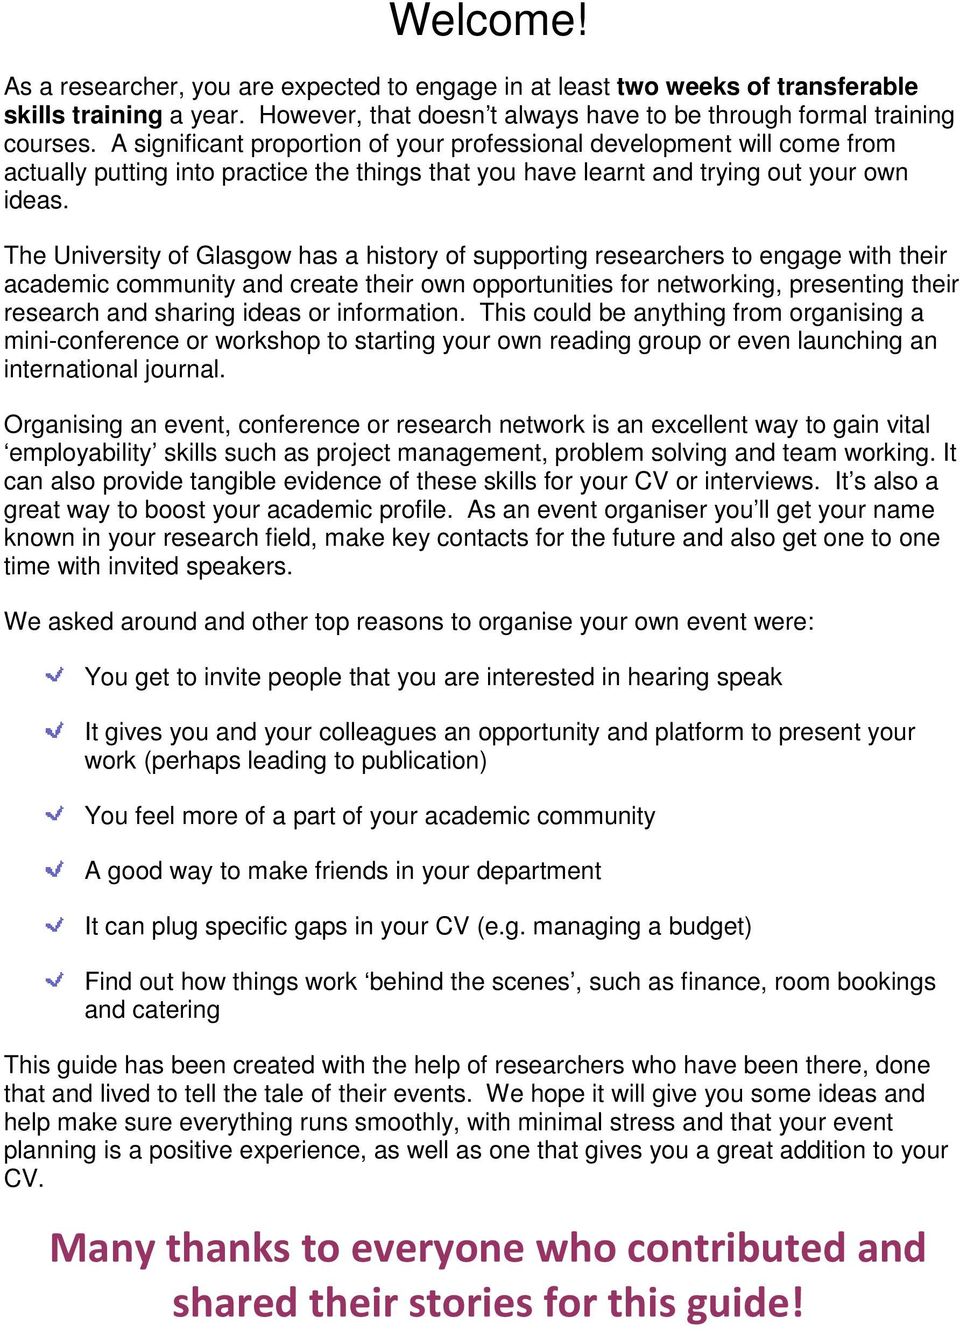 The University of Glasgow has a history of supporting researchers to engage with their academic community and create their own opportunities for networking, presenting their research and sharing